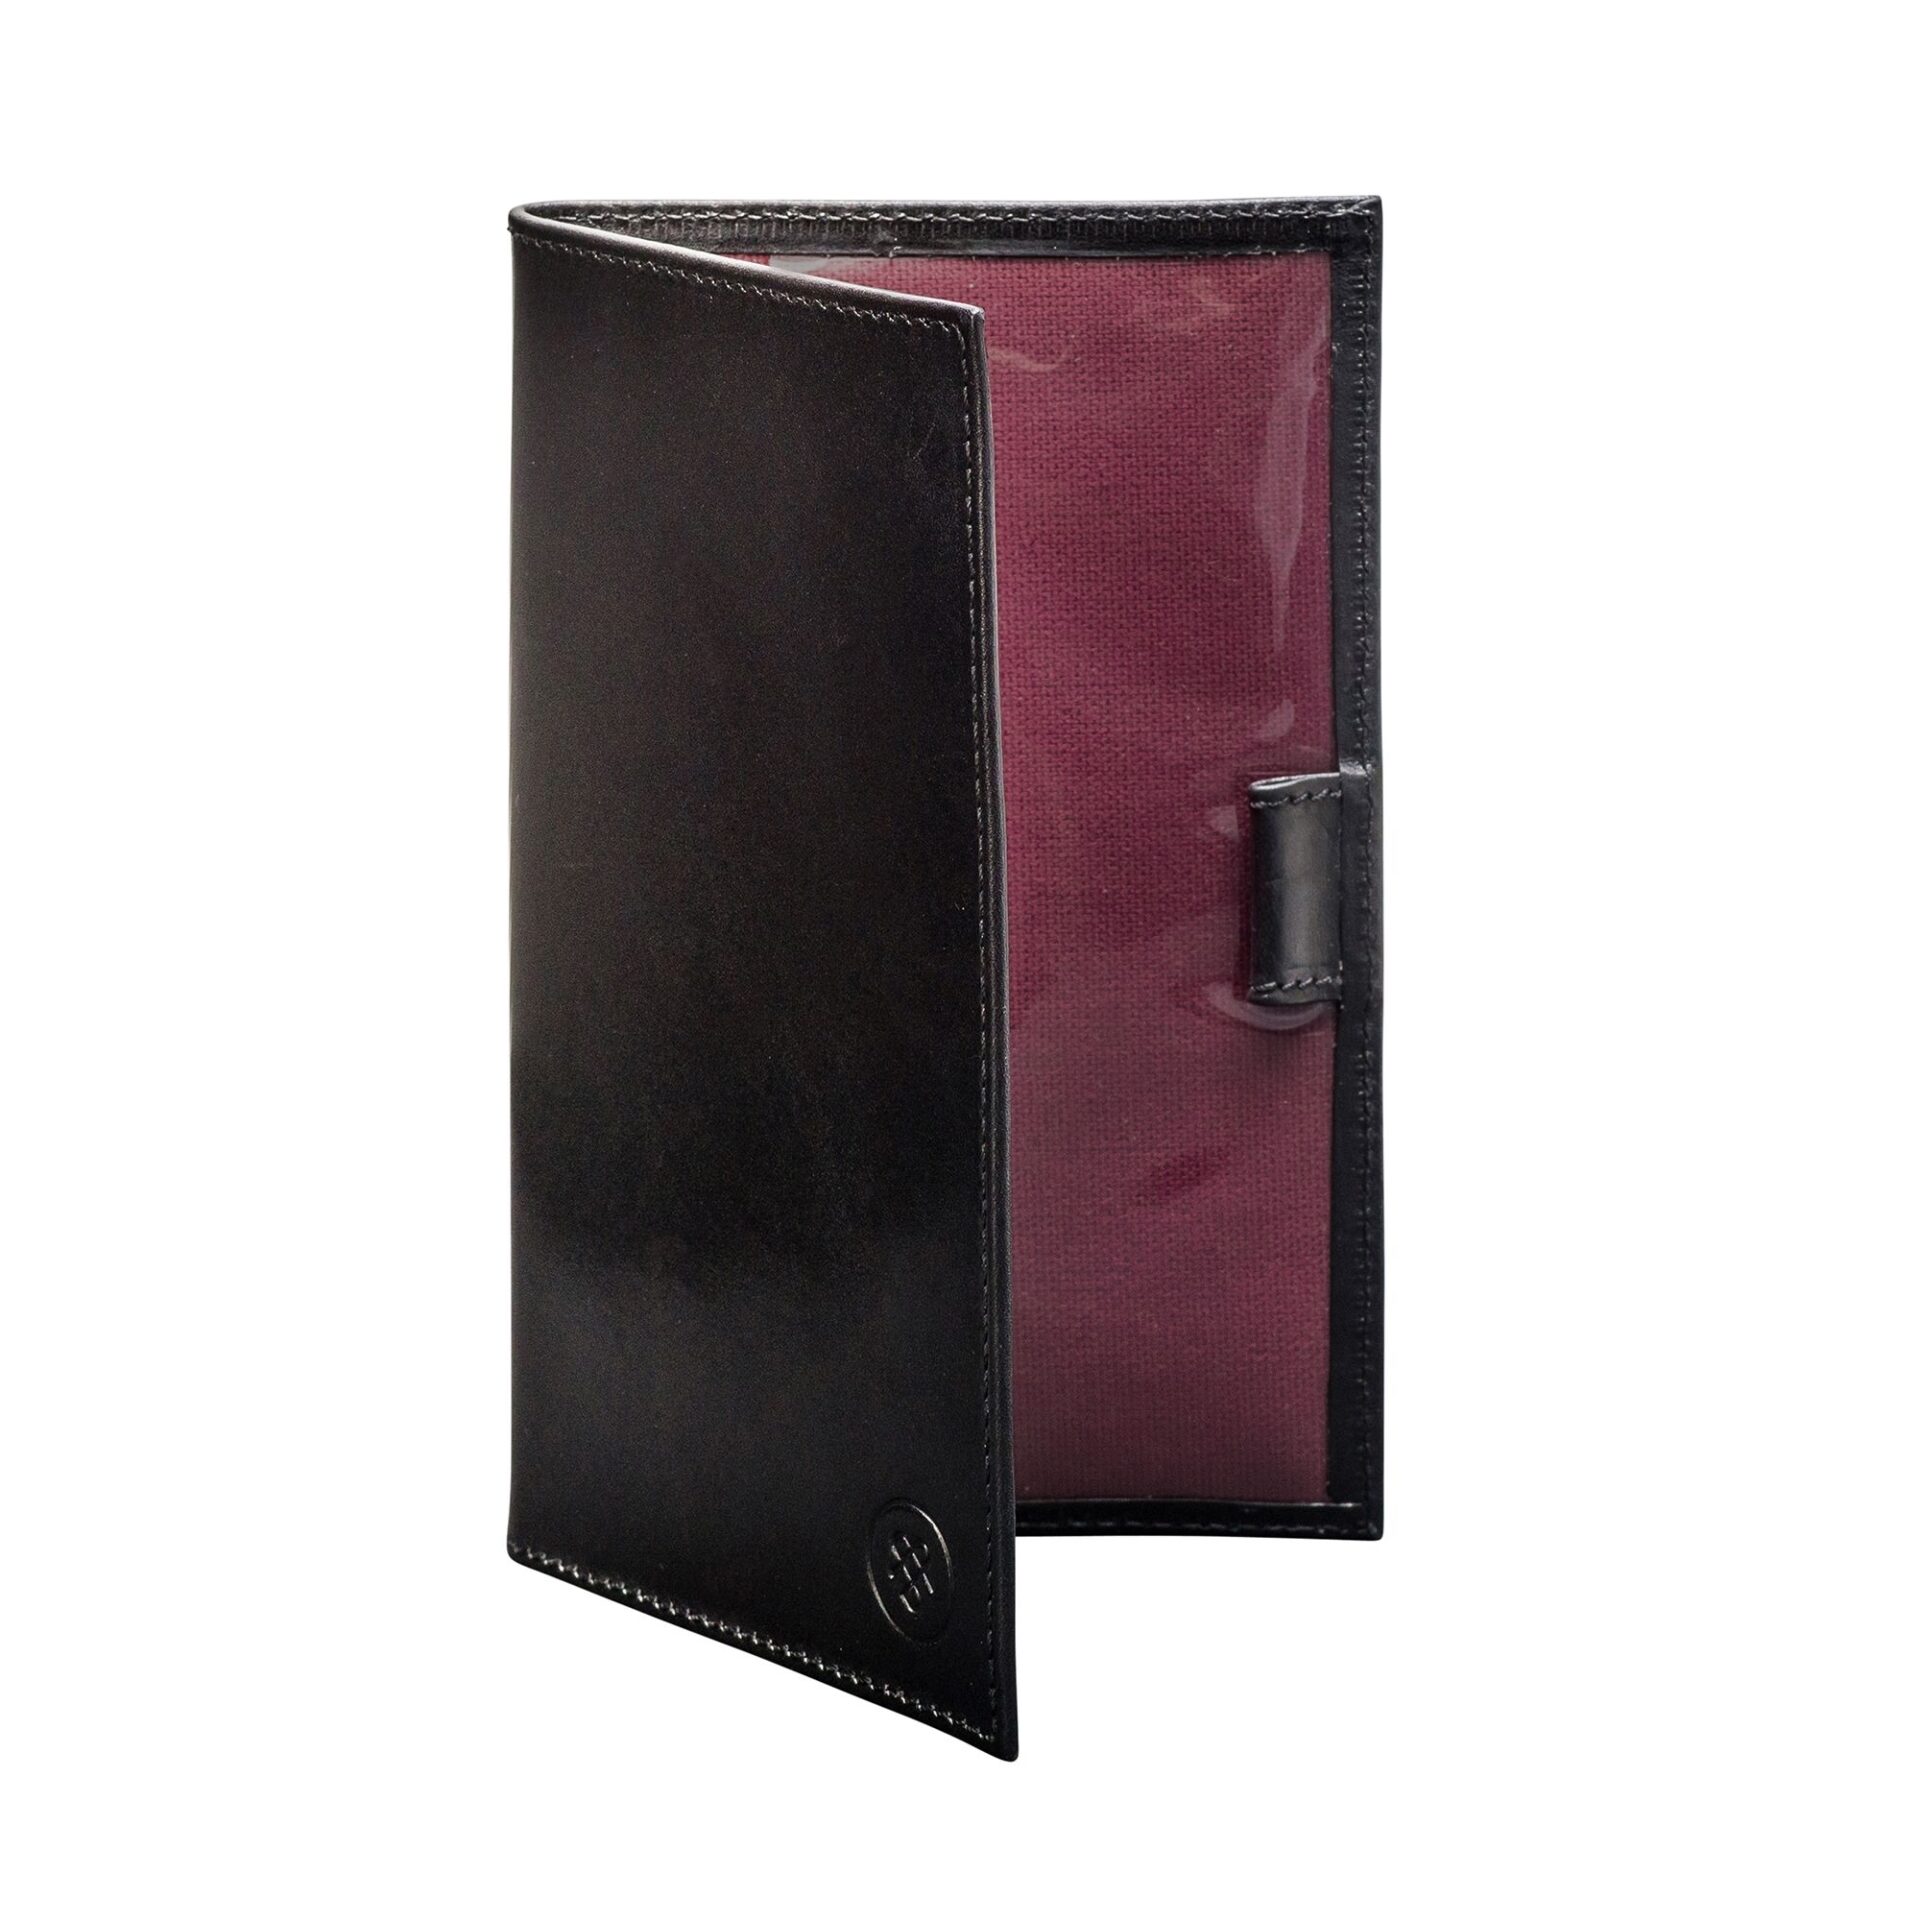 sestino Golf card score holder in Black with Wine lining